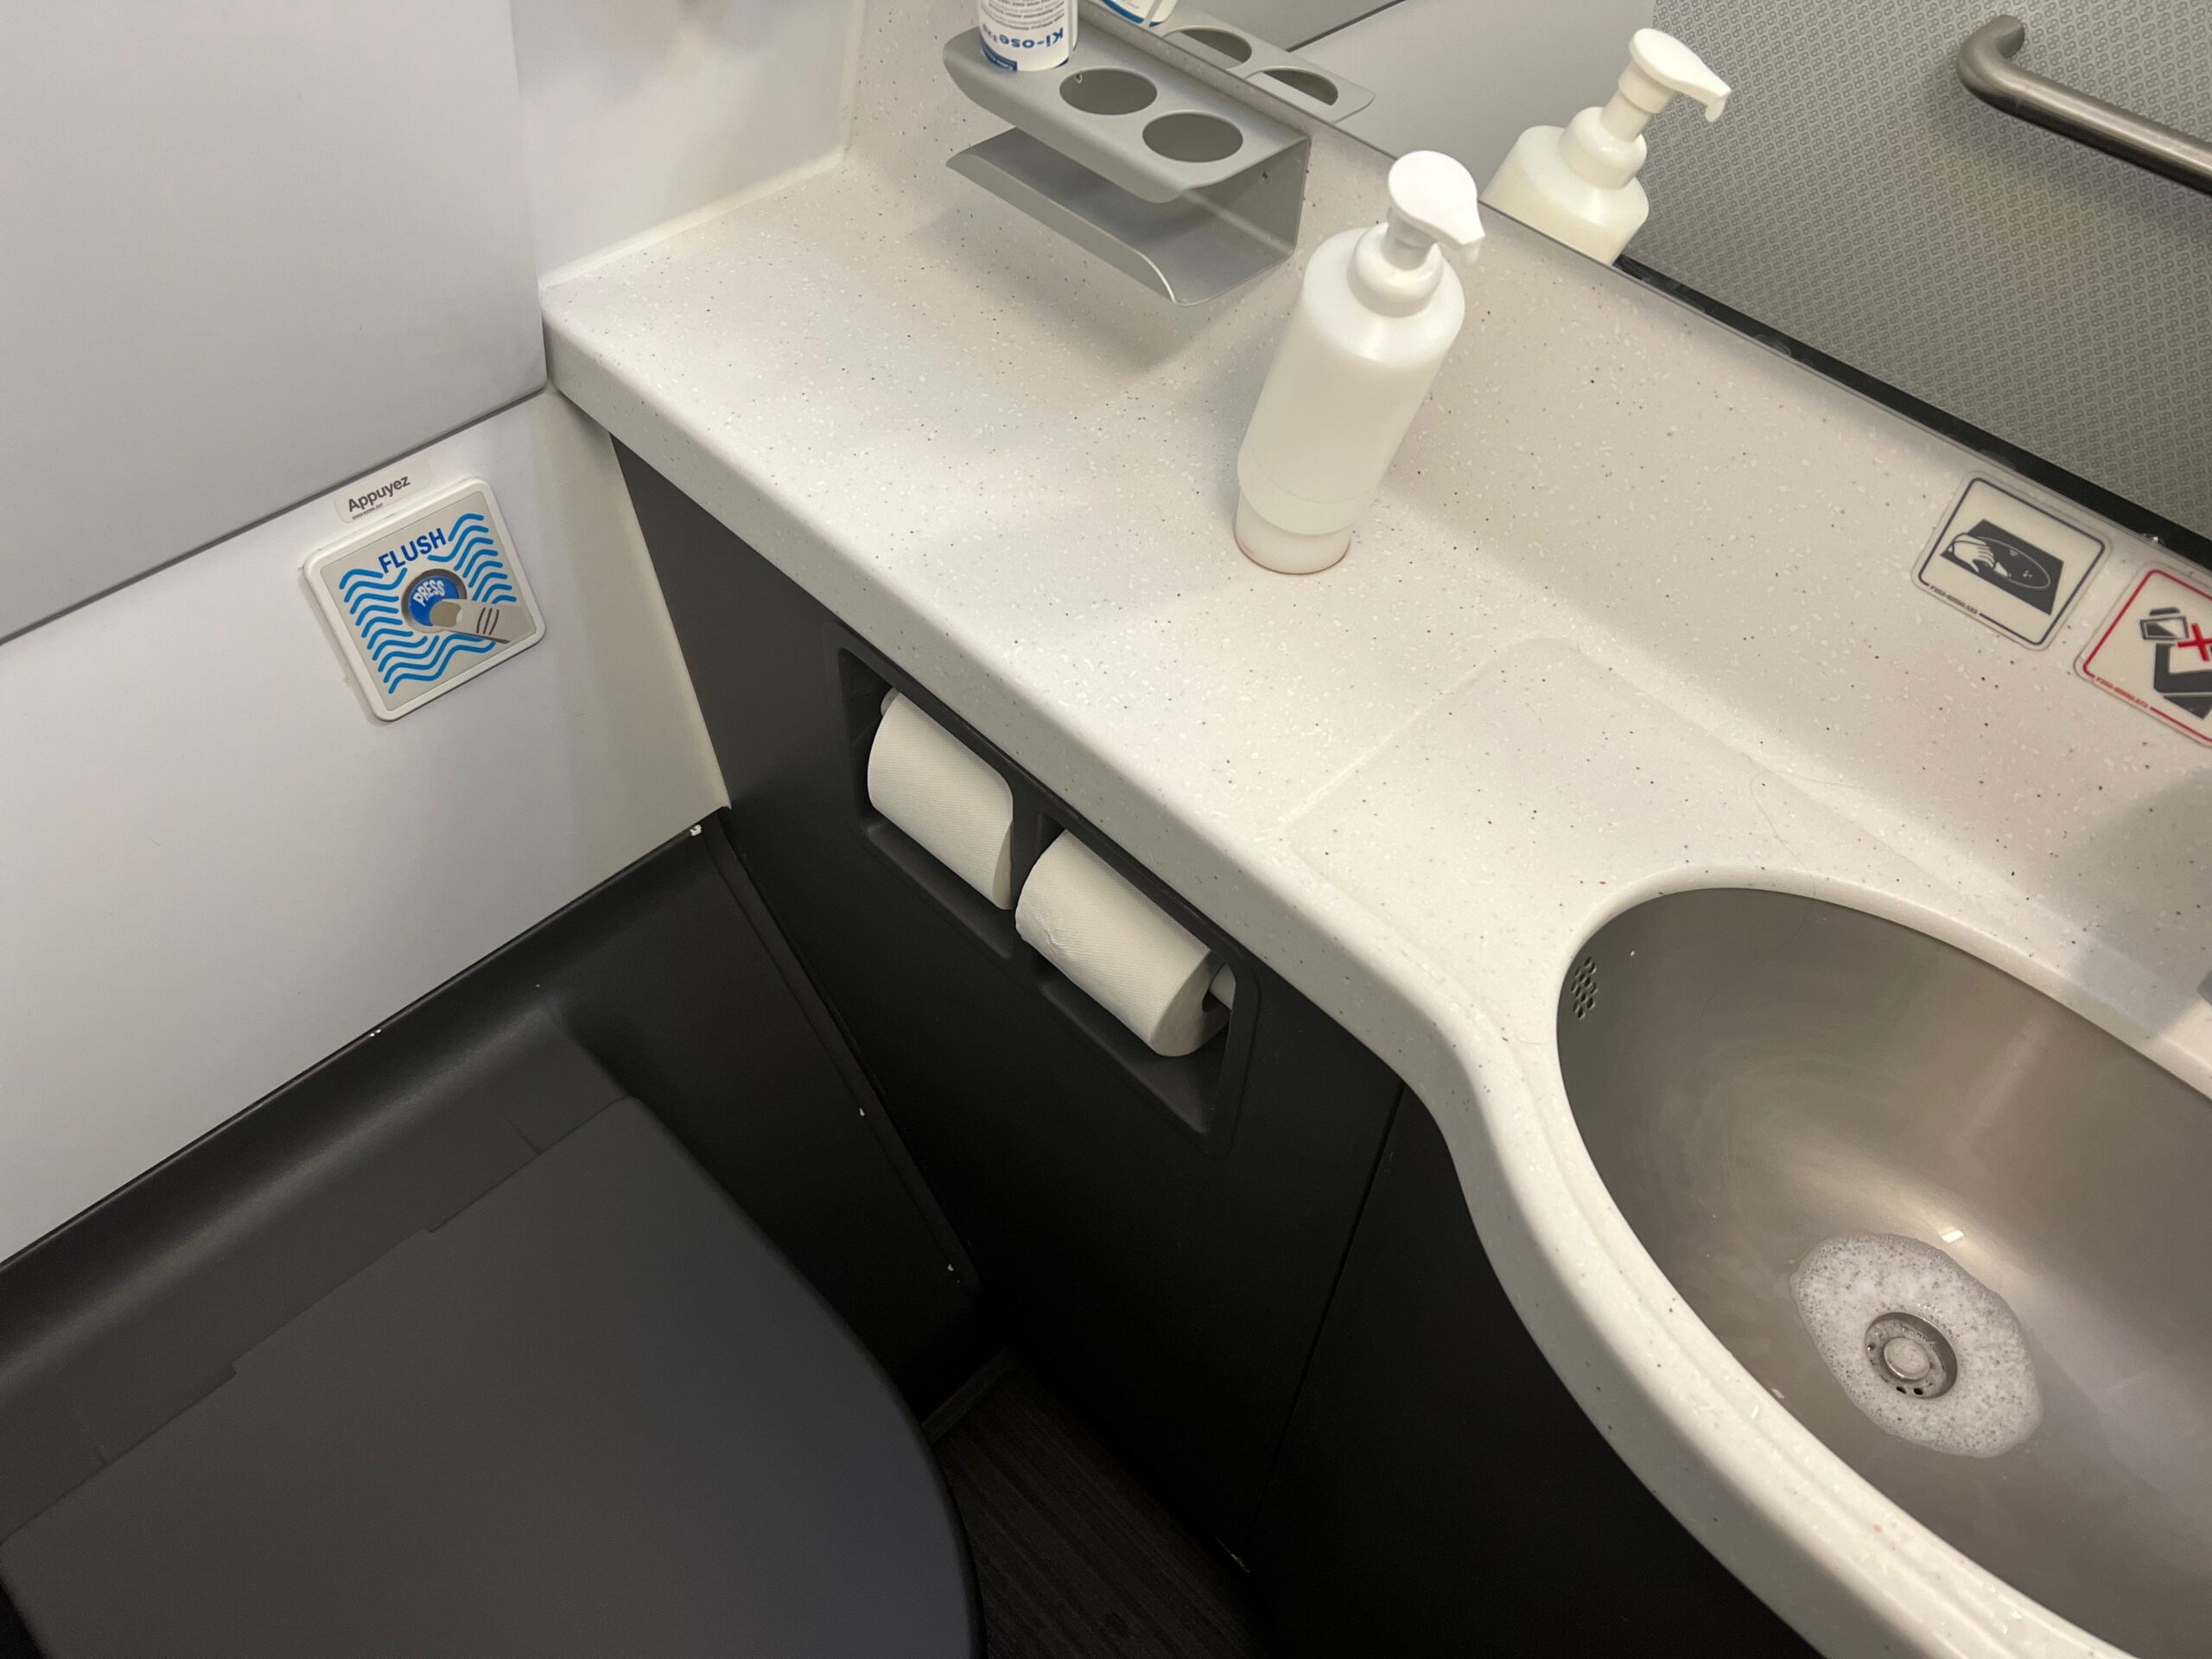 Flying on La Compagnie all-business class airline from Paris to New York &mdash; the bathroom.